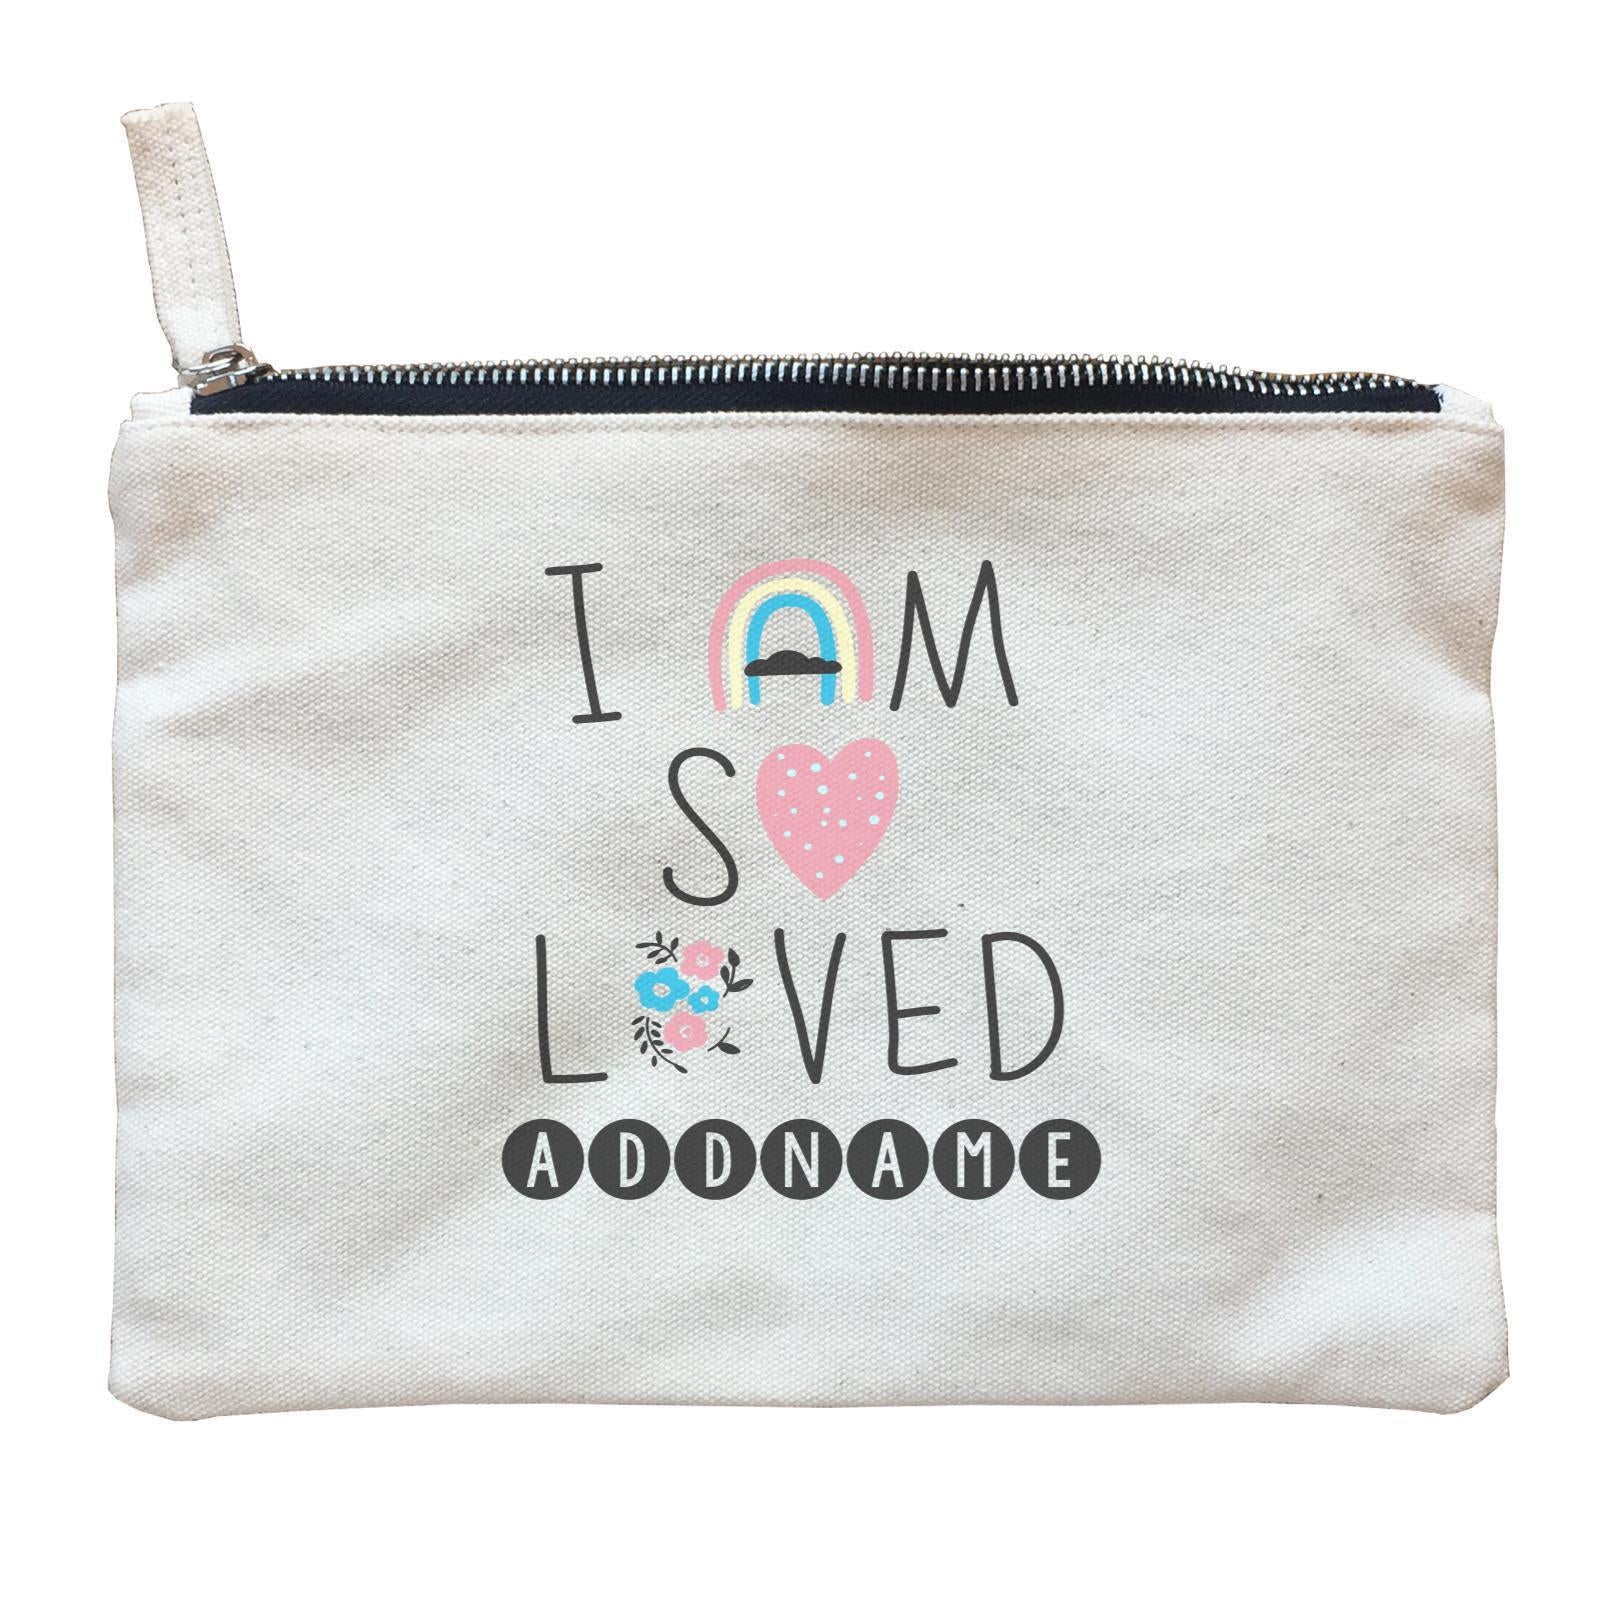 Children's Day Gift Series I Am So Loved Addname  Zipper Pouch